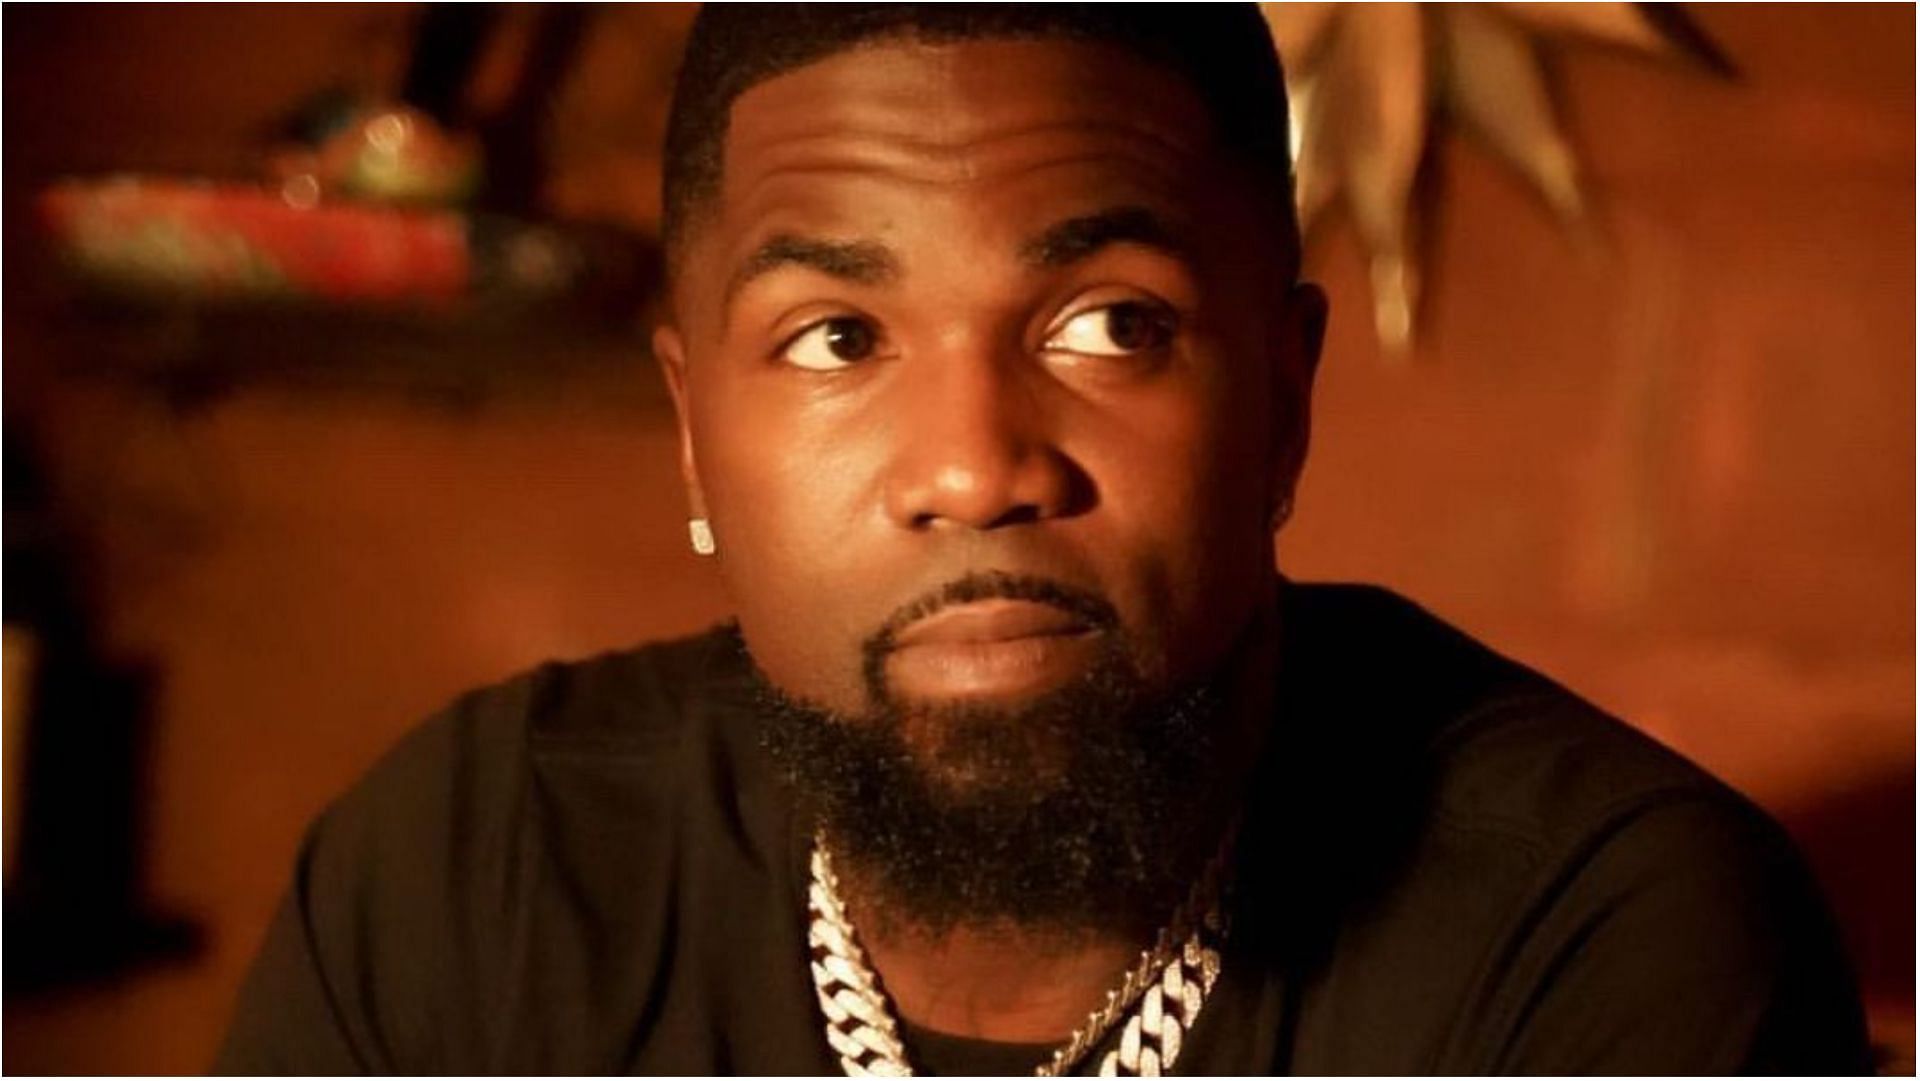 Tsu Surf is among those arrested on racketeering charges (Image via tsu_surf/Instagram)